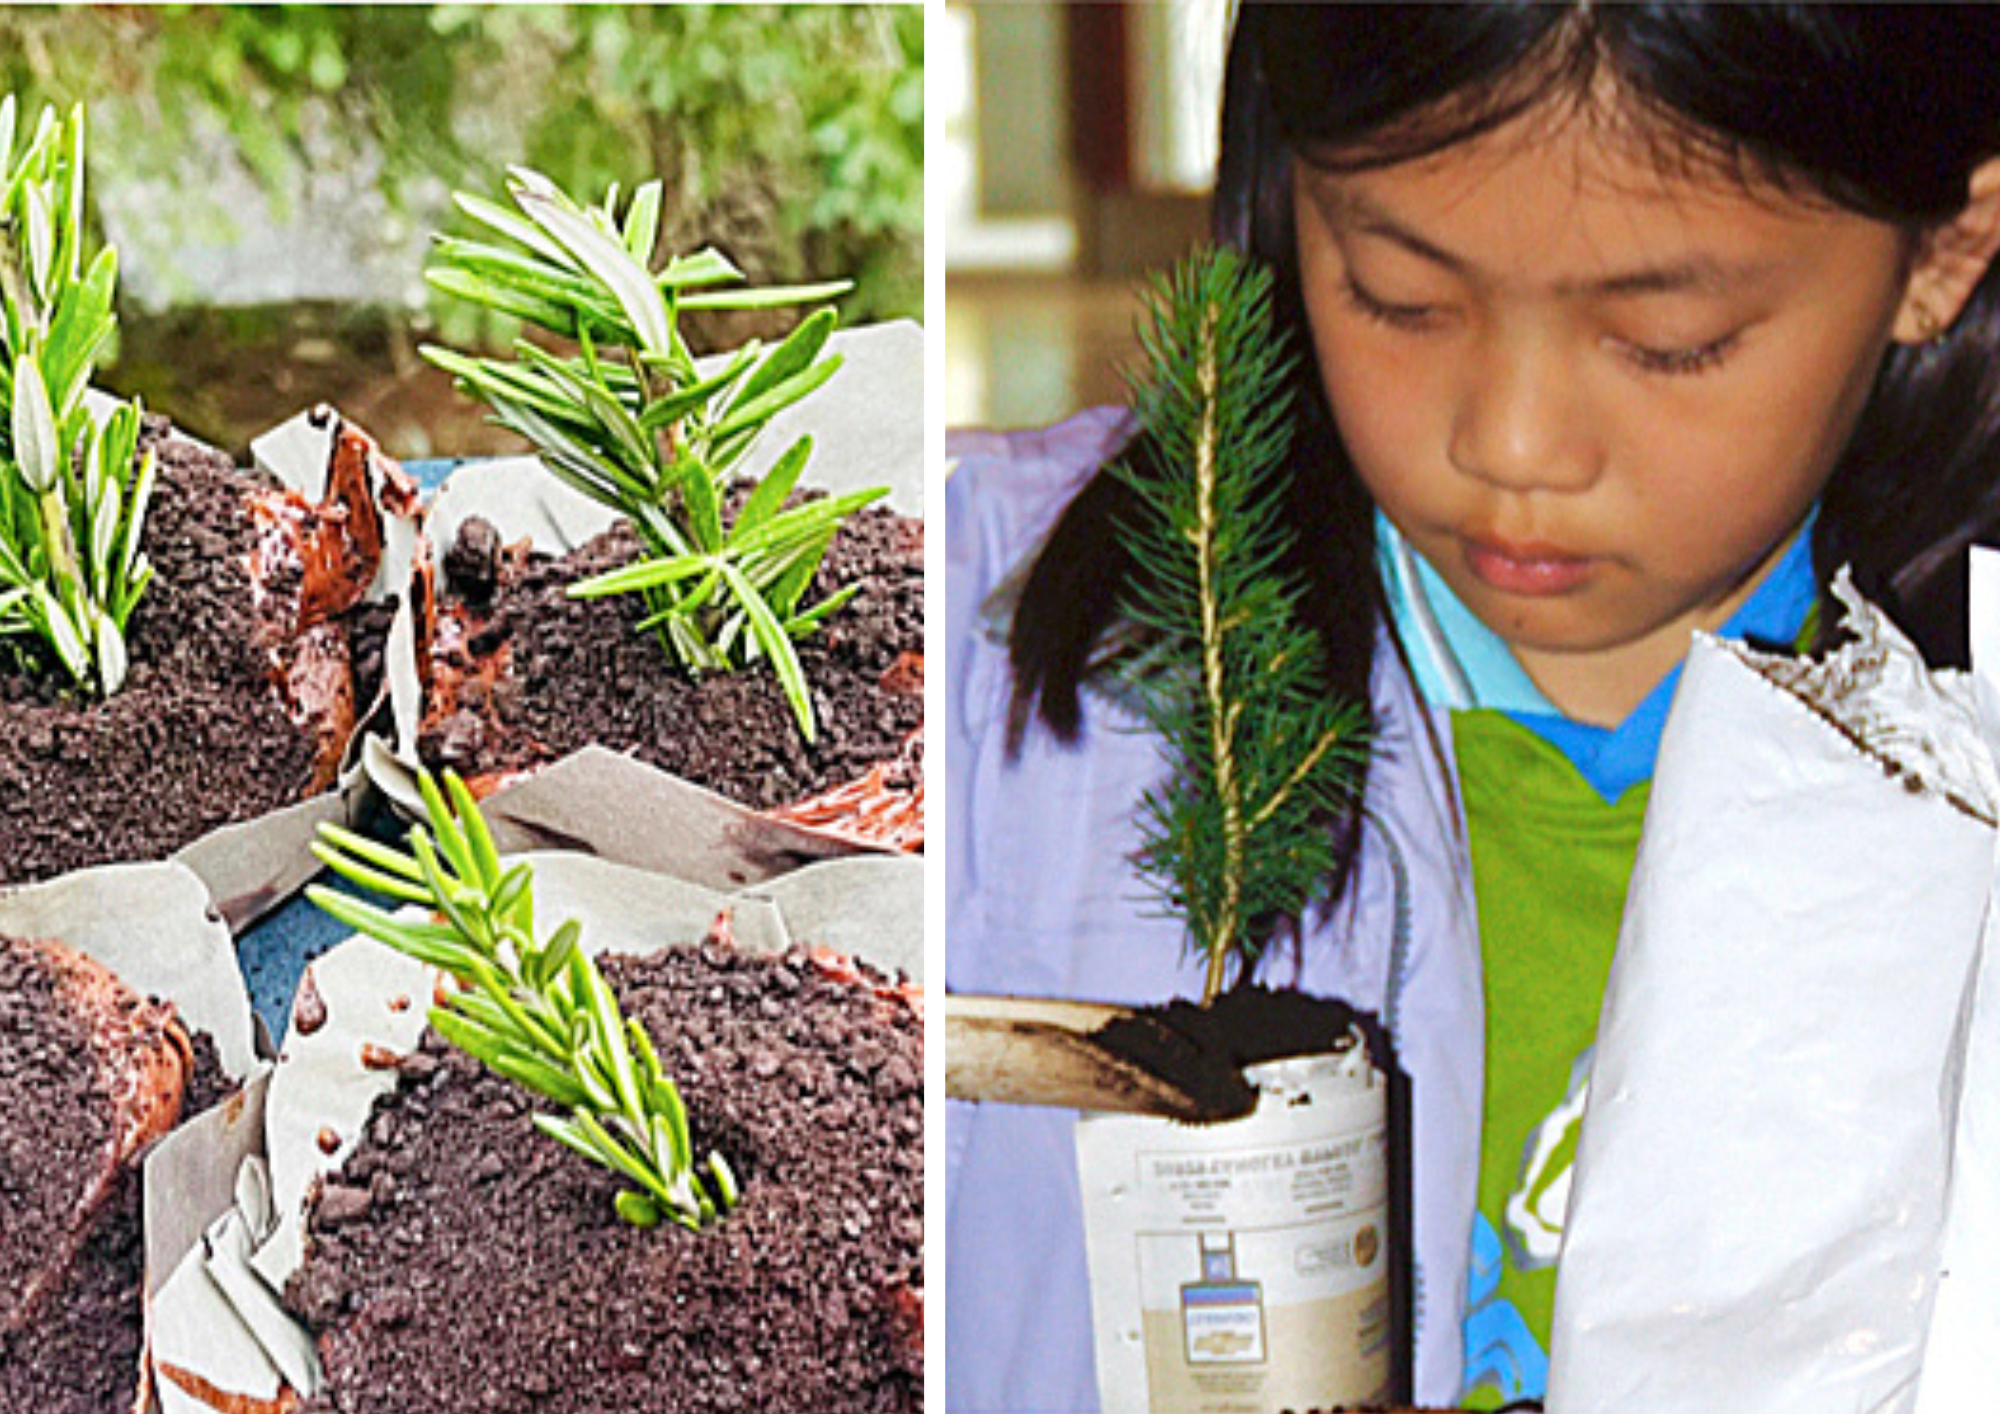 Seedlings in pots and a child getting ready to plant